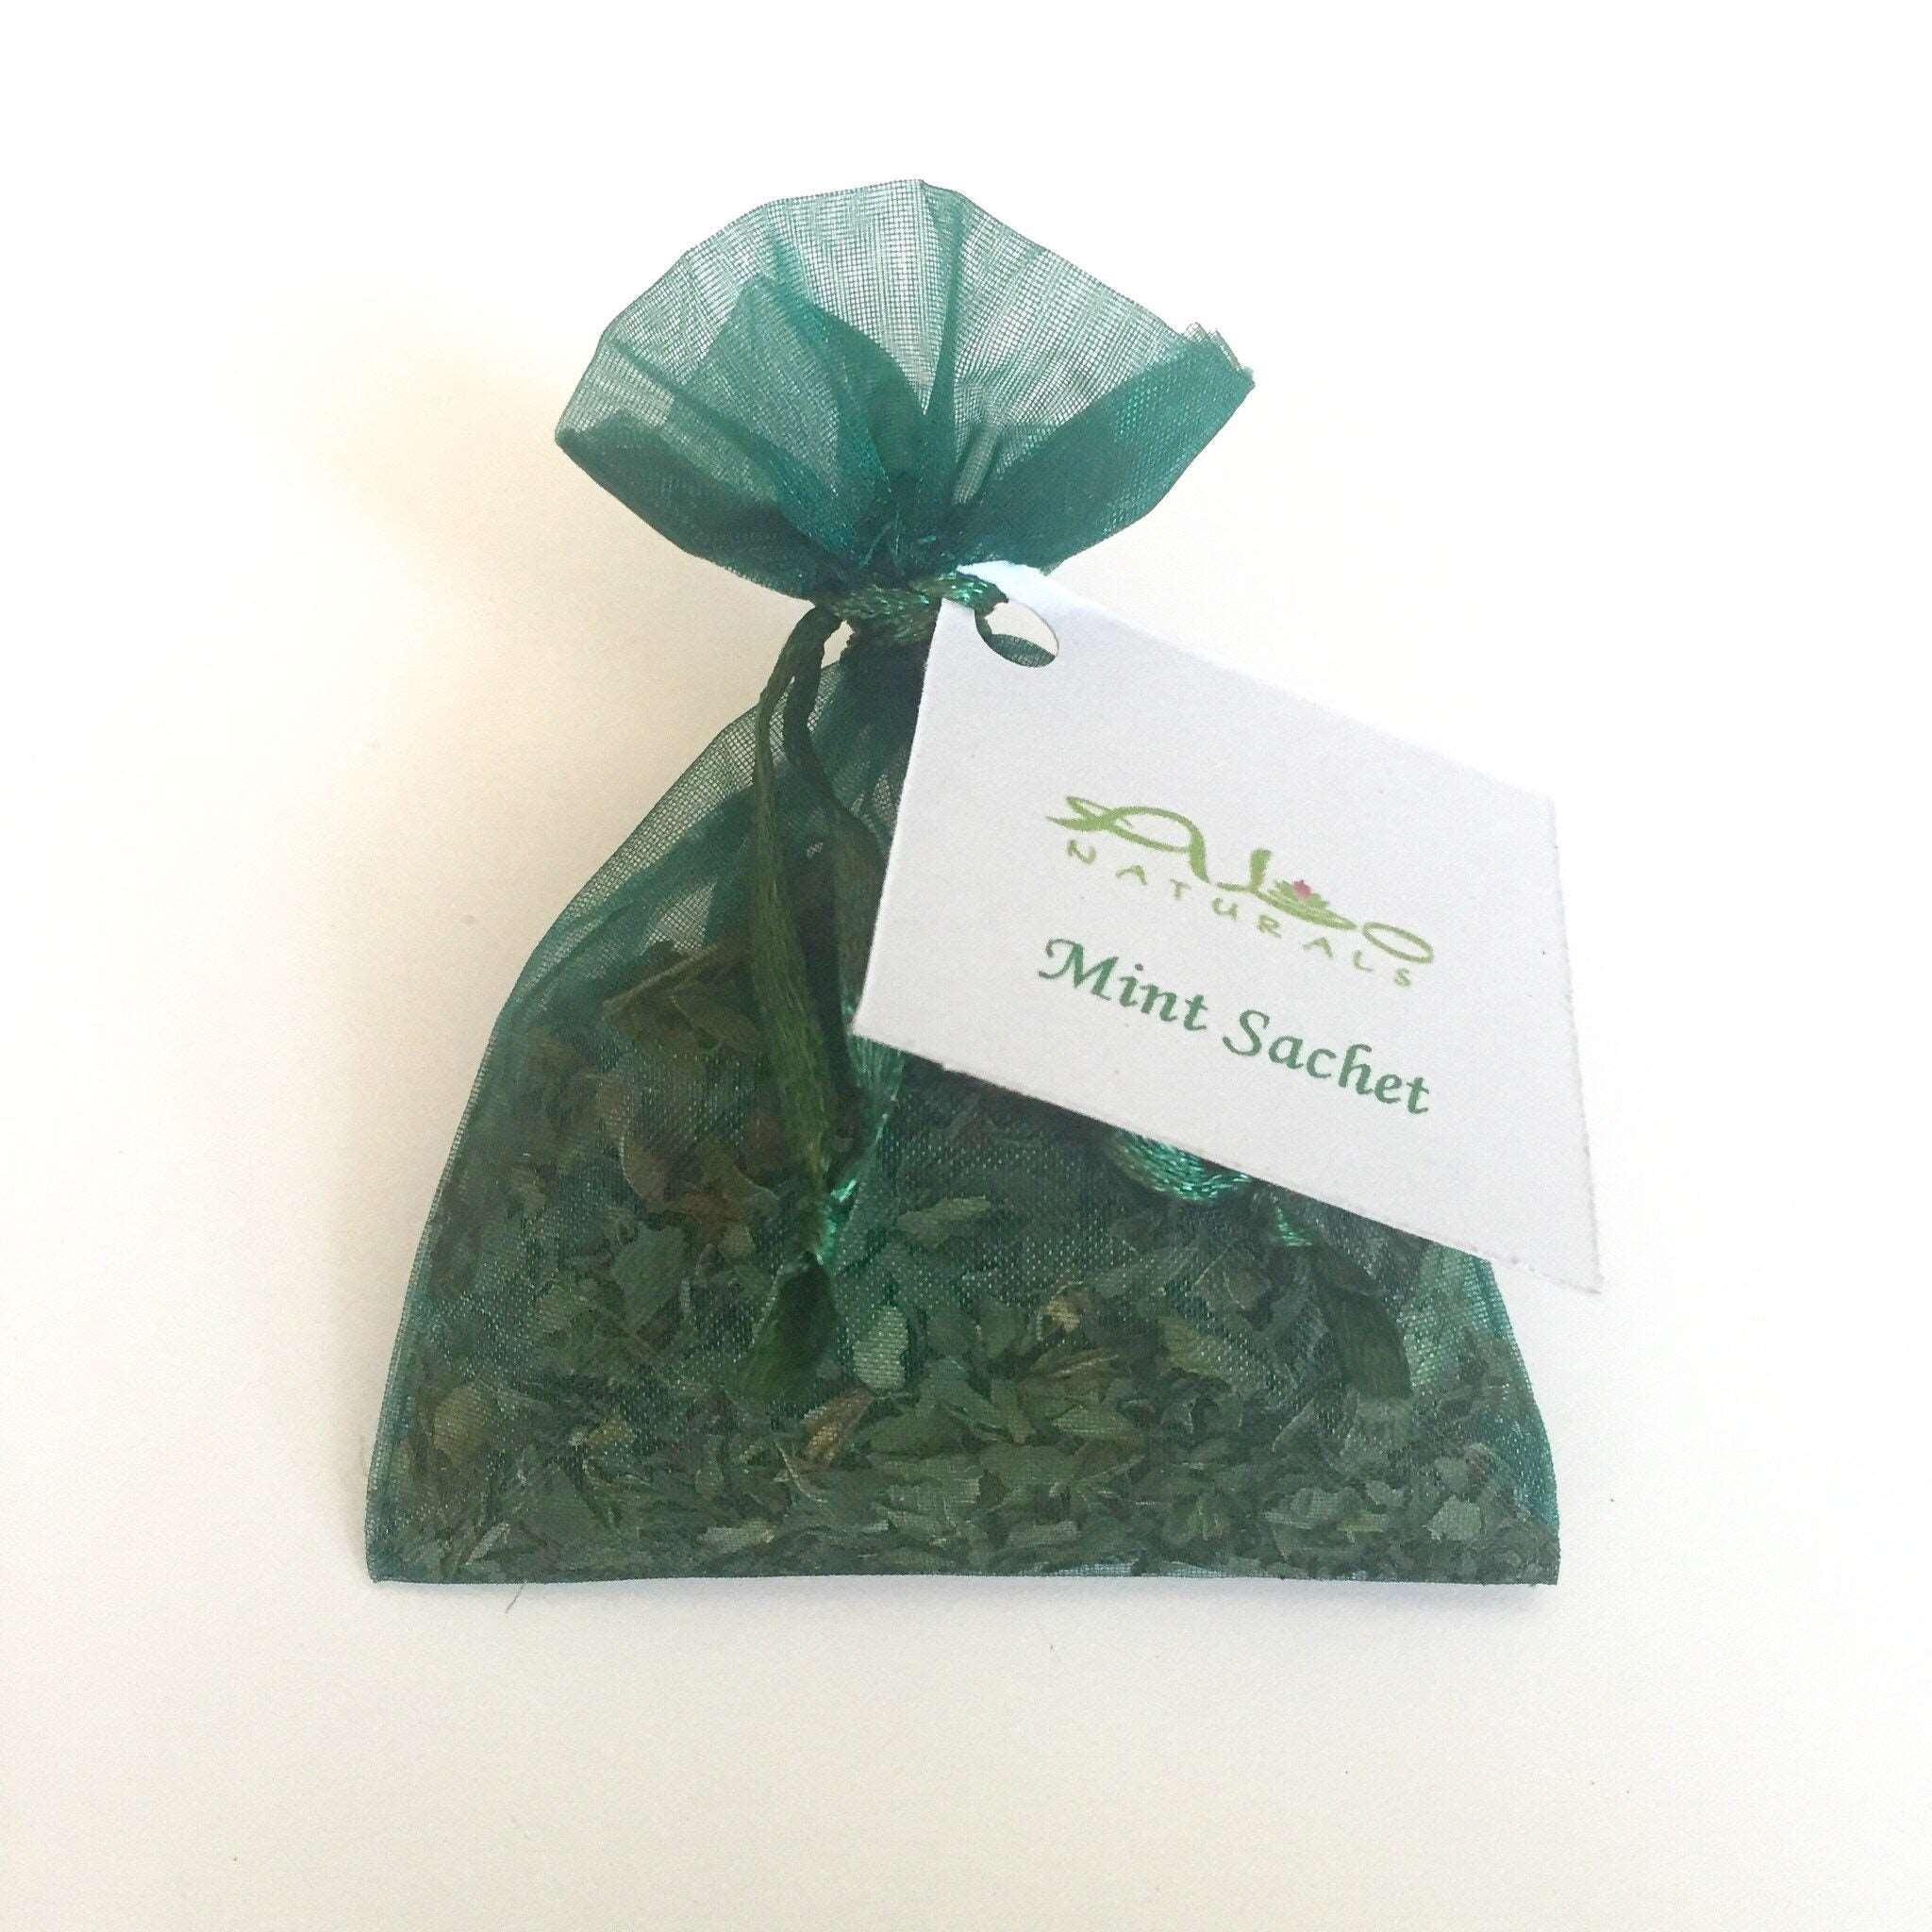 These refreshing Mint sachets are handmade by us with all natural botanicals.  Place in a drawer, closet, car, suitcase, purse, or anywhere you desire a fresh, pure, and natural scent!